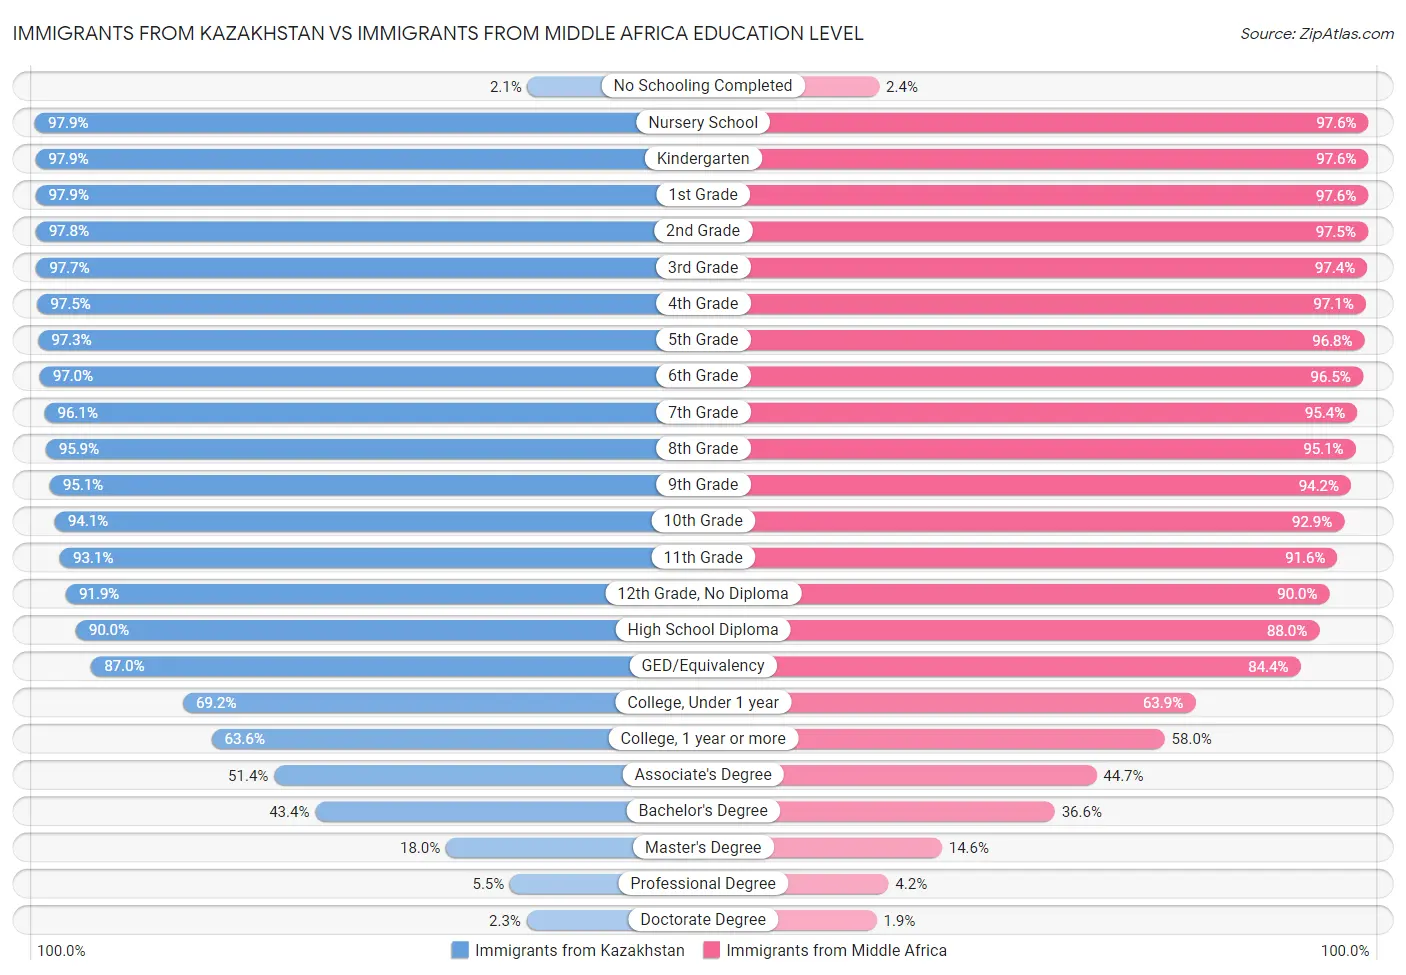 Immigrants from Kazakhstan vs Immigrants from Middle Africa Education Level